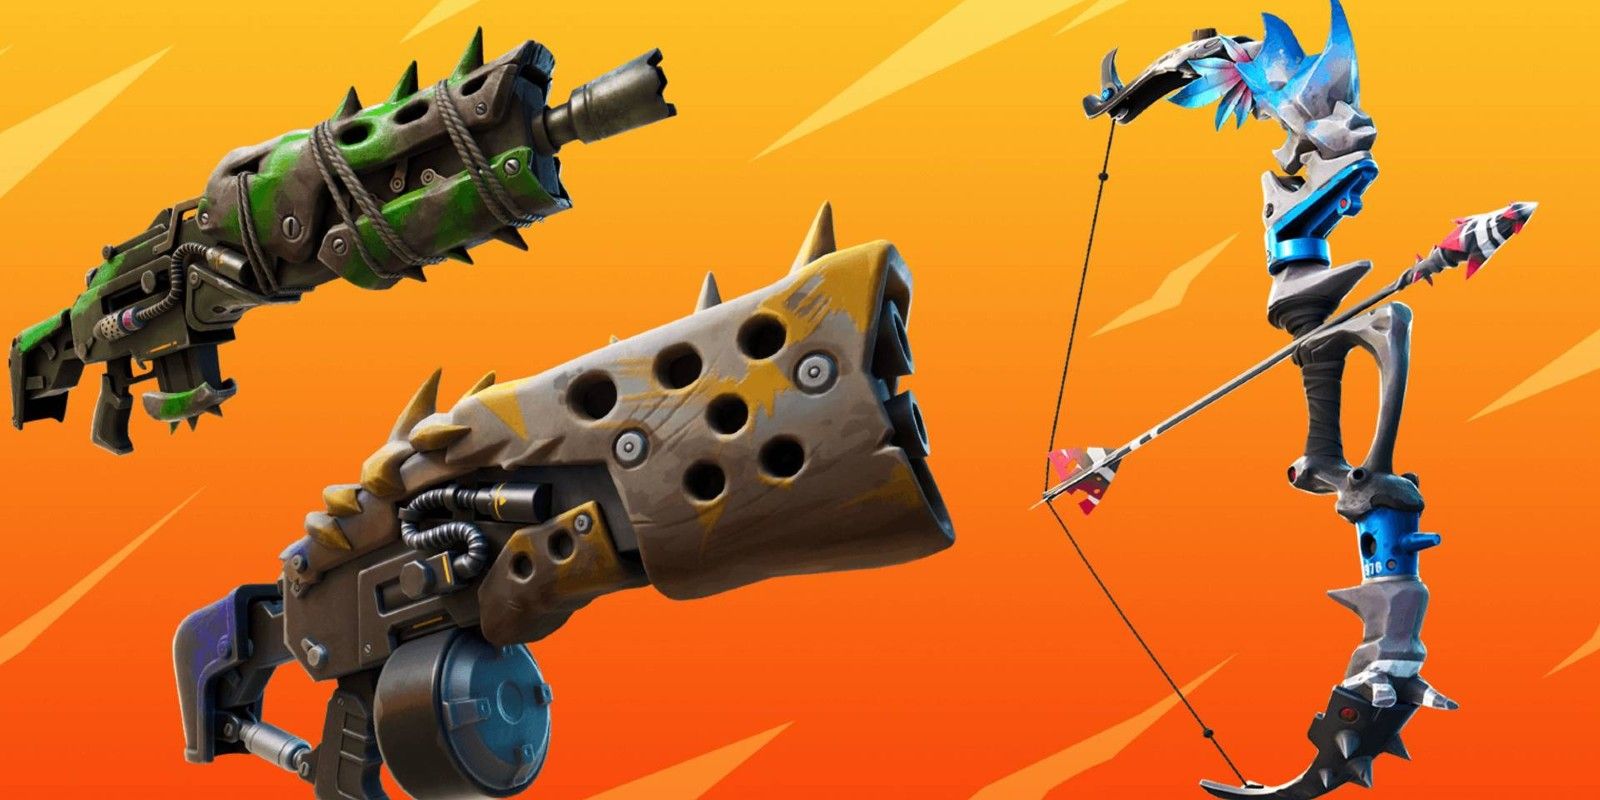 New Makeshift, Primal, and Mechanical weapons in Fortnite Season 6